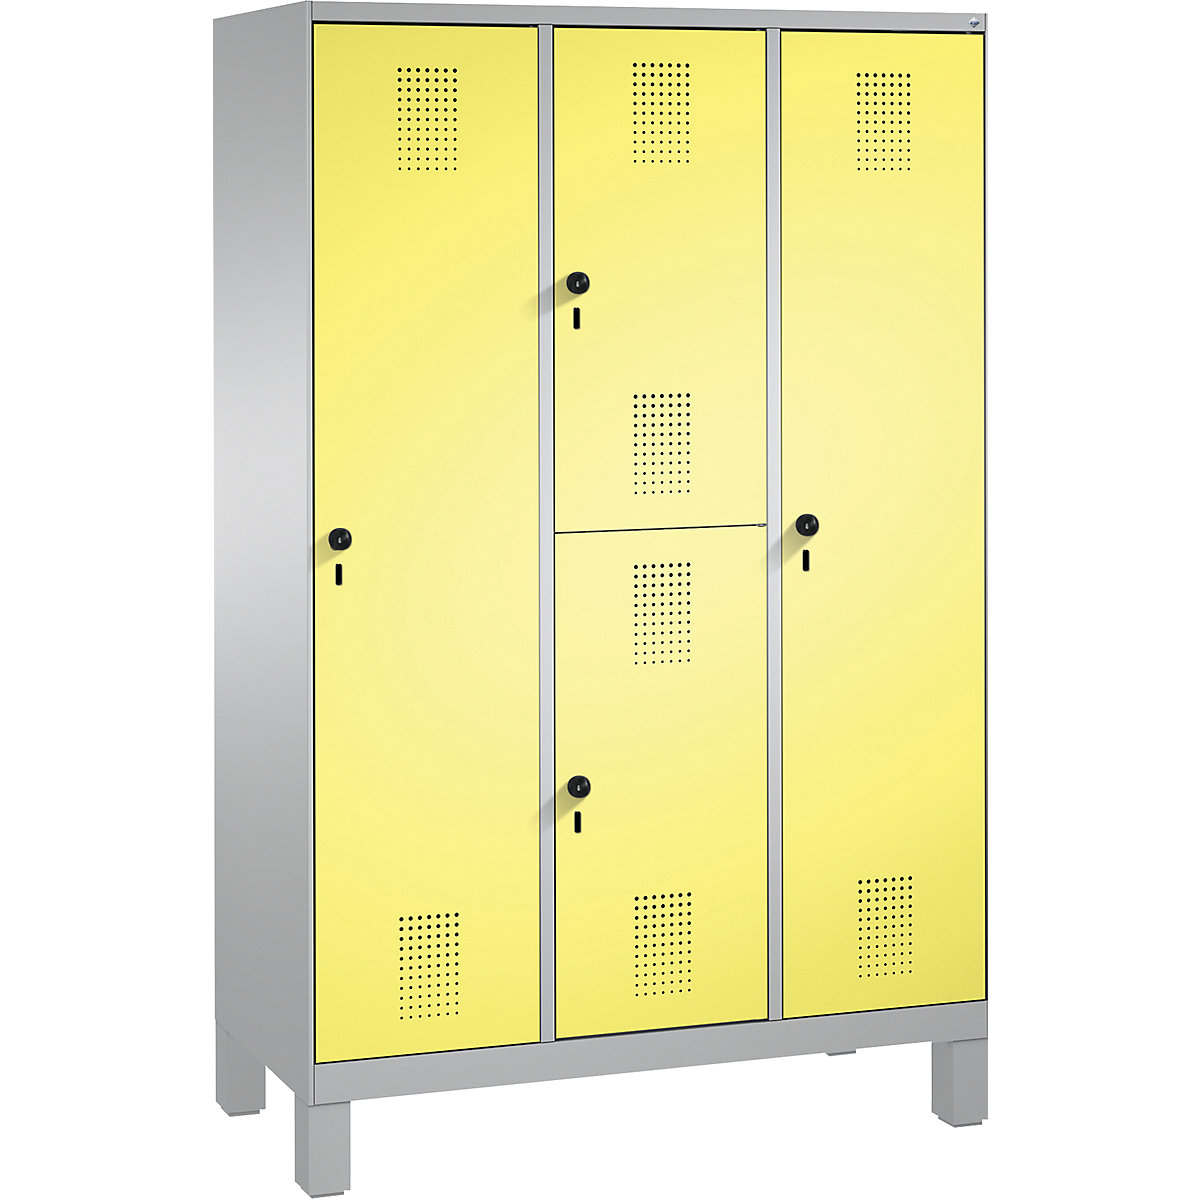 EVOLO combination cupboard, single and double tier – C+P, 3 compartments, 4 doors, compartment width 400 mm, with feet, white aluminium / sulphur yellow